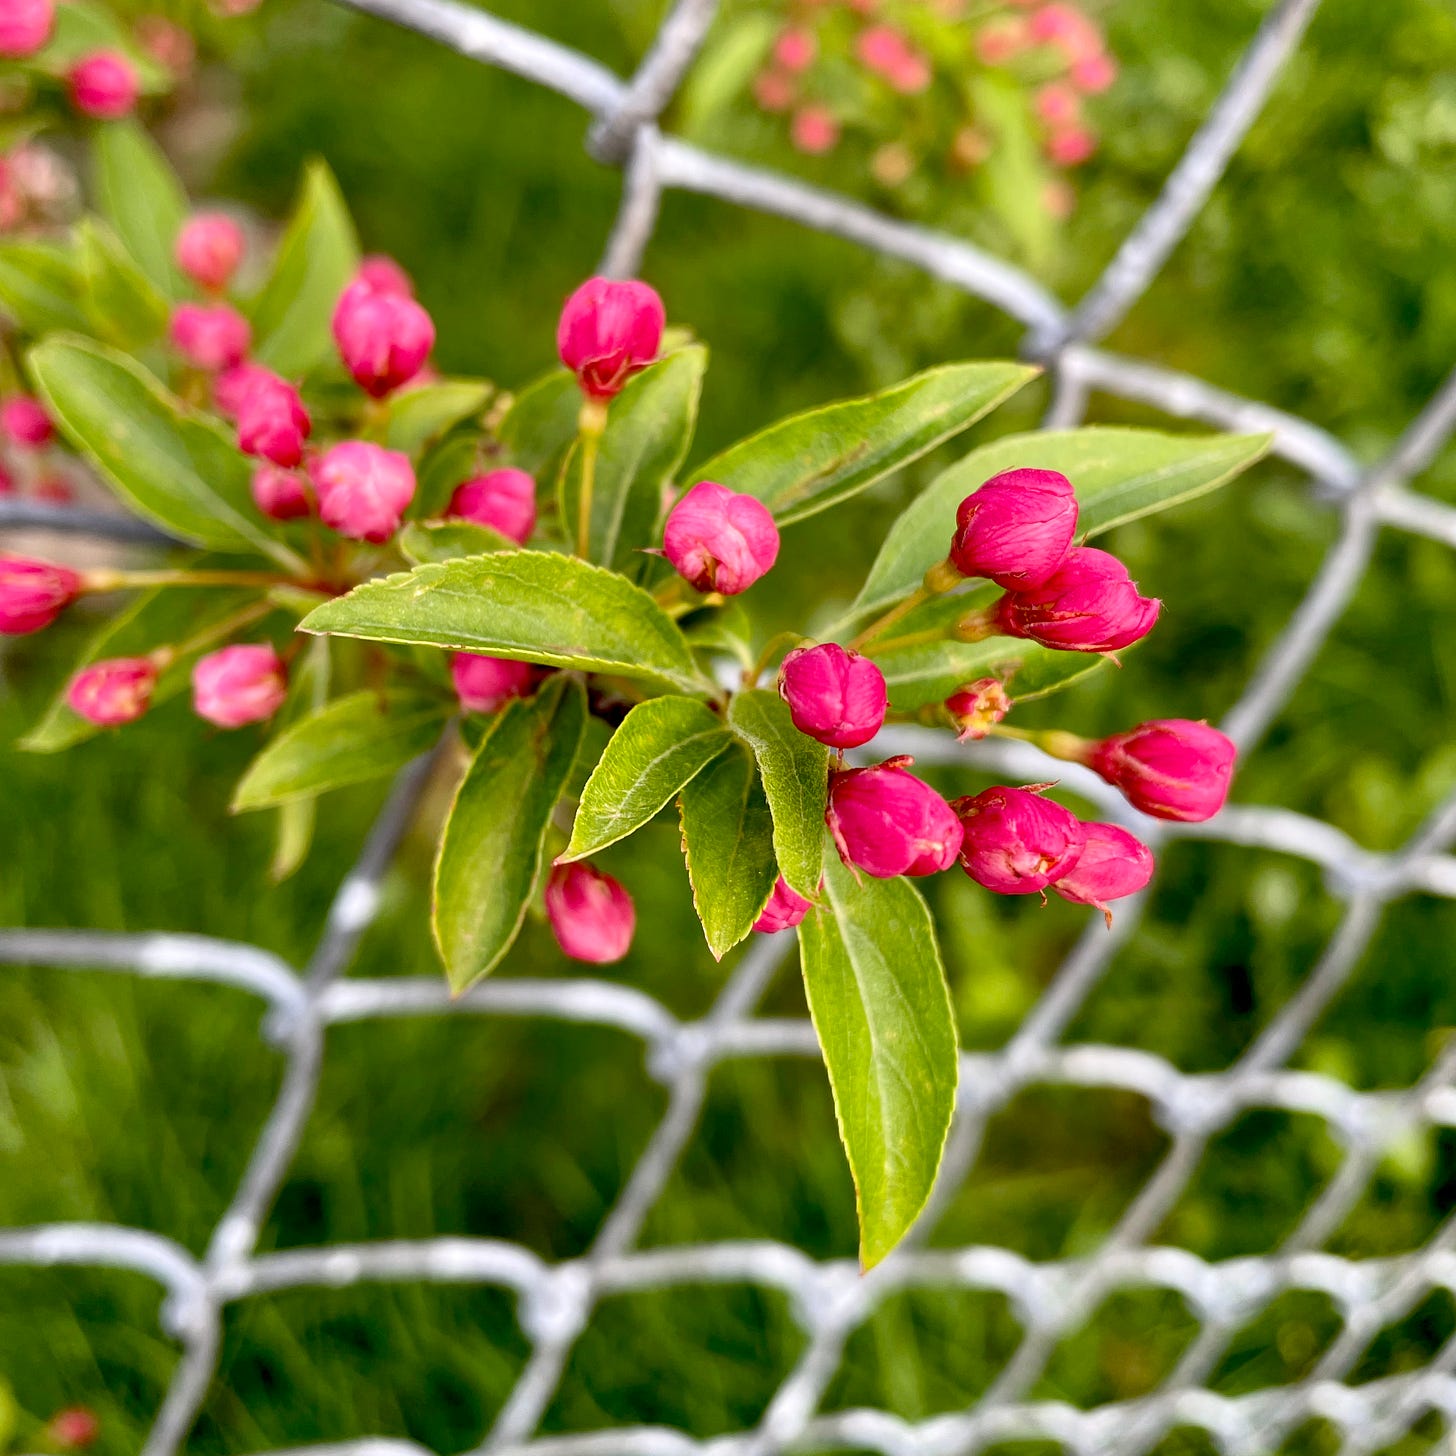 rich dark pink crabapple blossoms on a branch peeking through a chain link fence